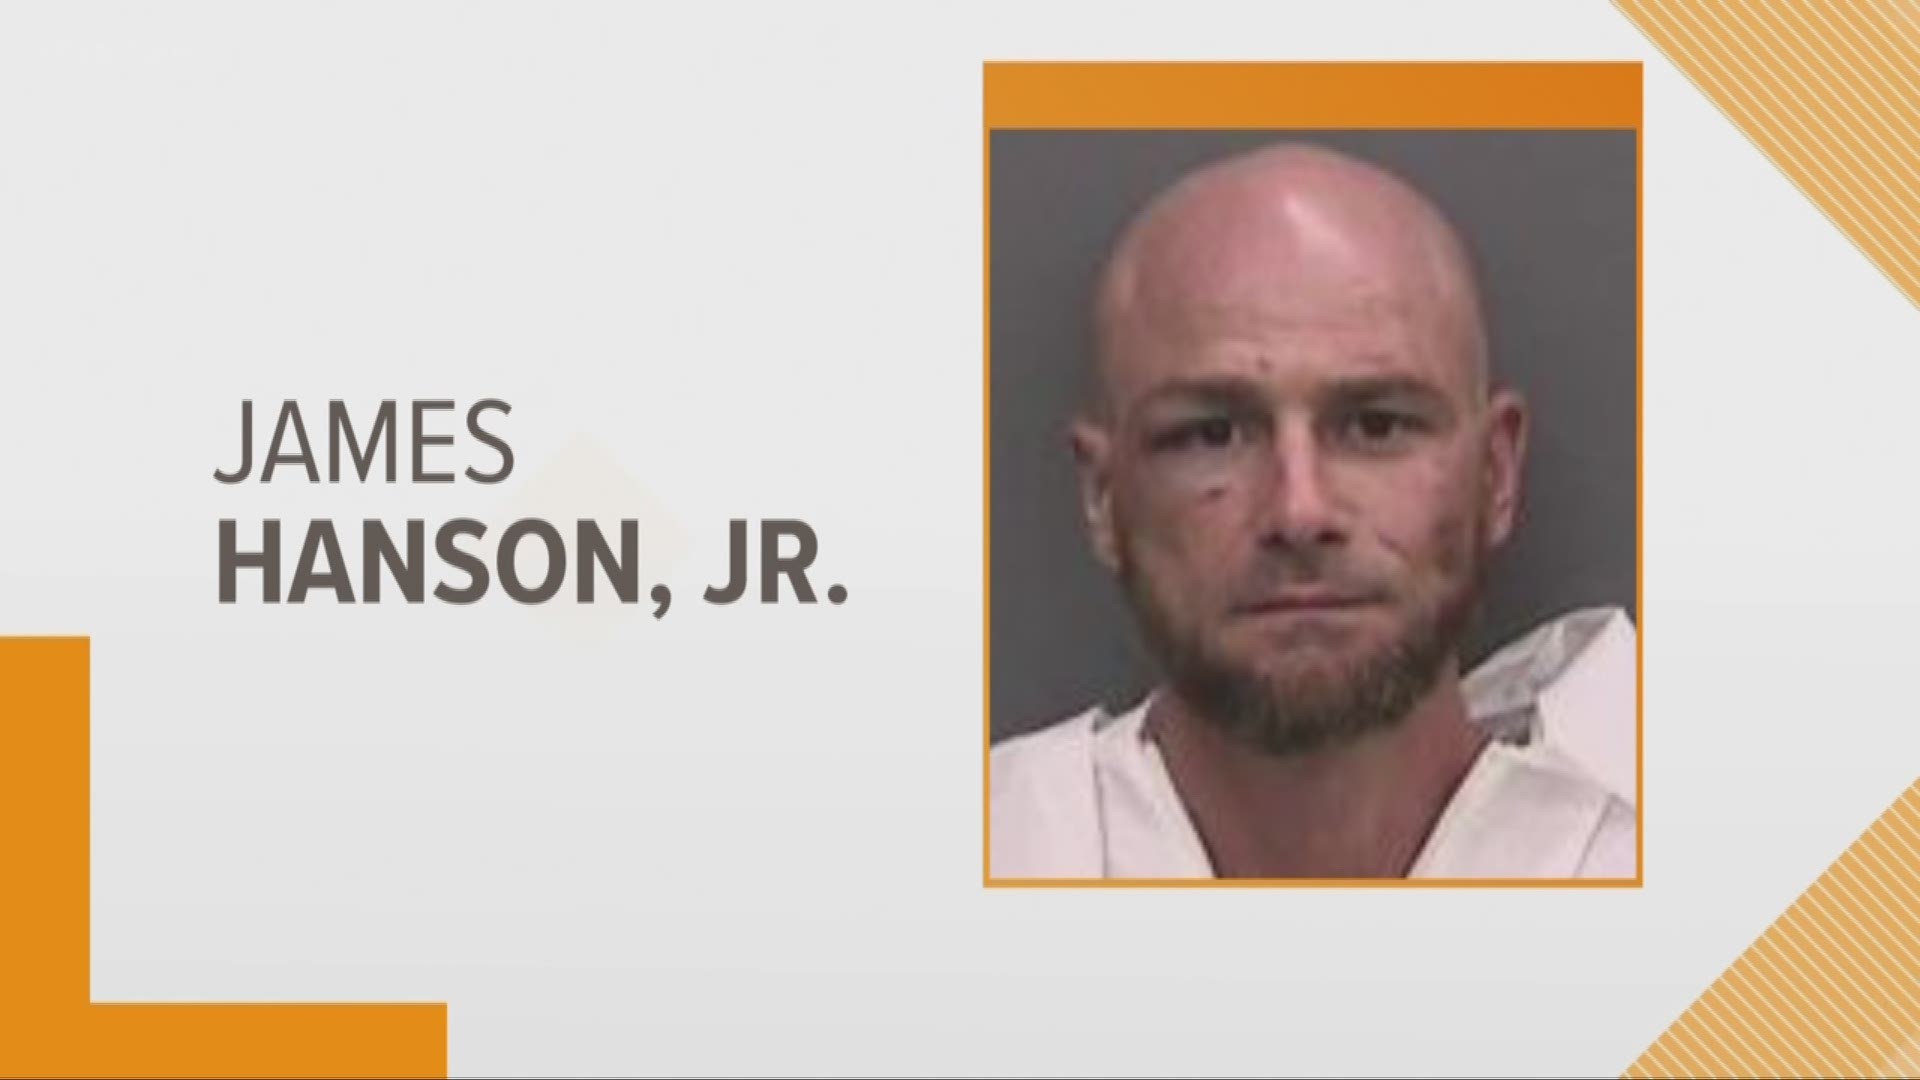 James Hanson is charged with premeditated first-degree murder, carjacking, grand theft of a motor vehicle, kidnapping, resisting an officer with violence and robbery. https://on.wtsp.com/2yJYAS0